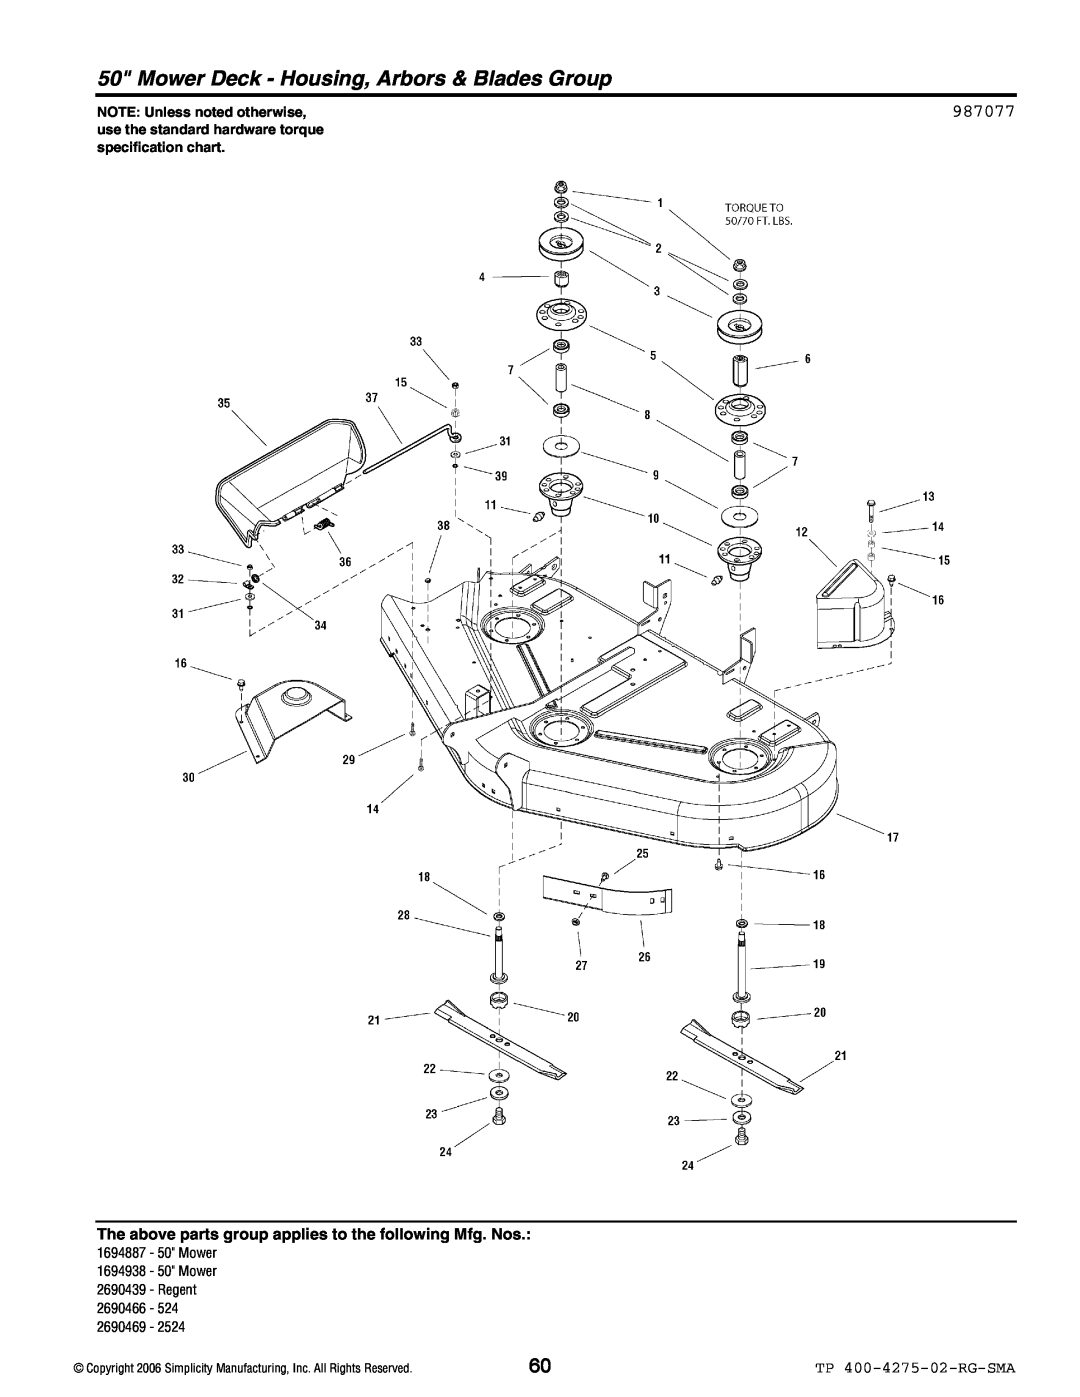 Simplicity 22HP Mower Deck - Housing, Arbors & Blades Group, 987077, TP 400-4275-02-RG-SMA, NOTE Unless noted otherwise 